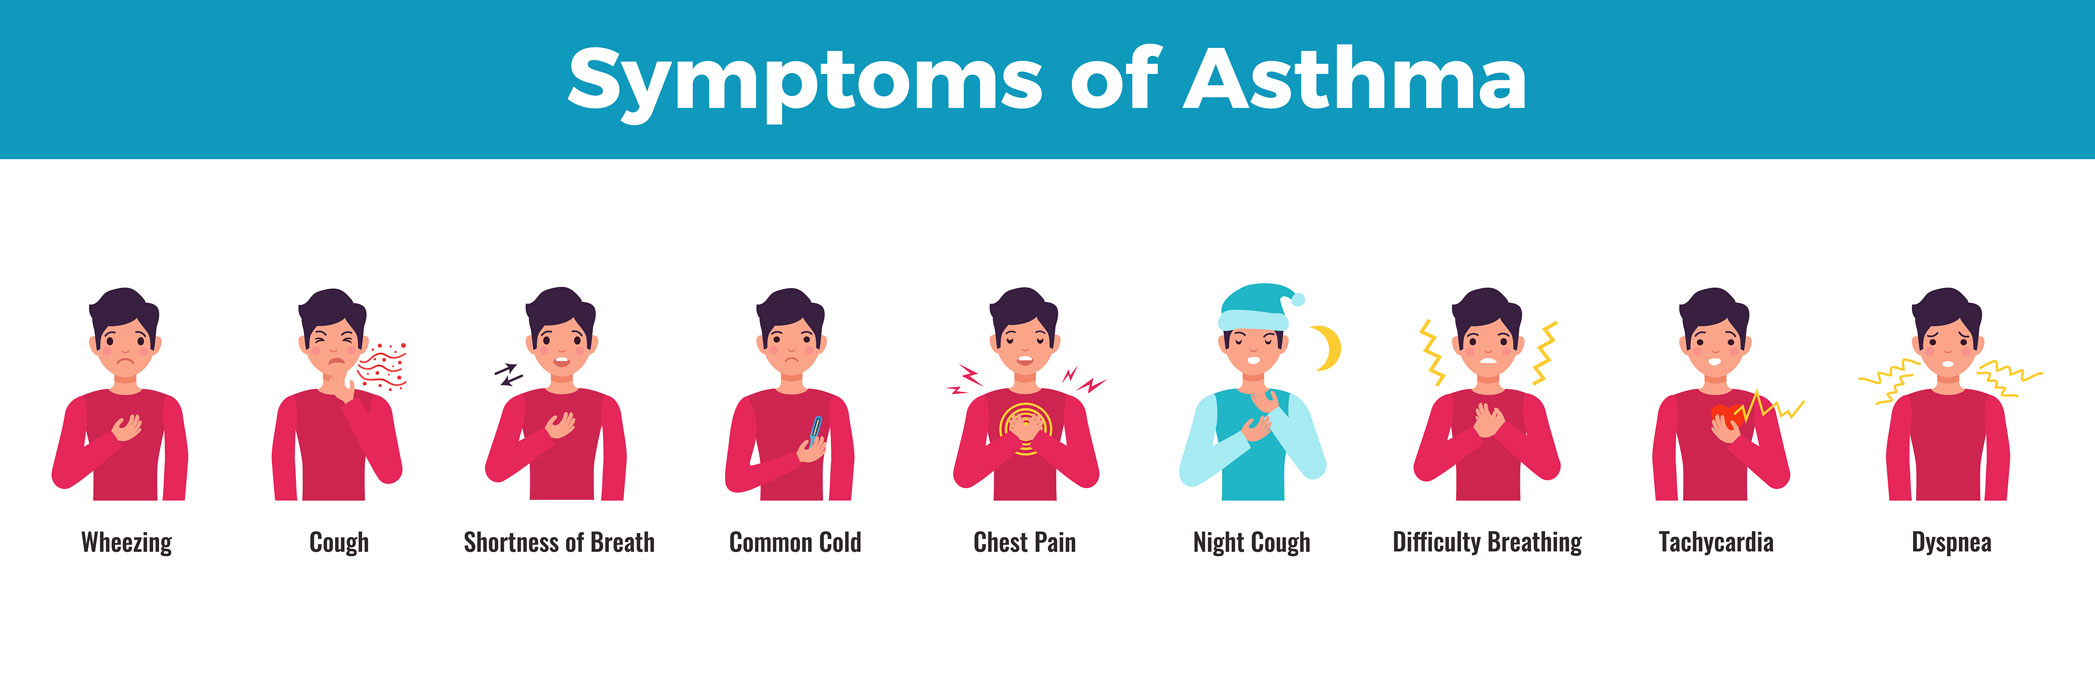 Symptoms  of Exercise induced asthma 

